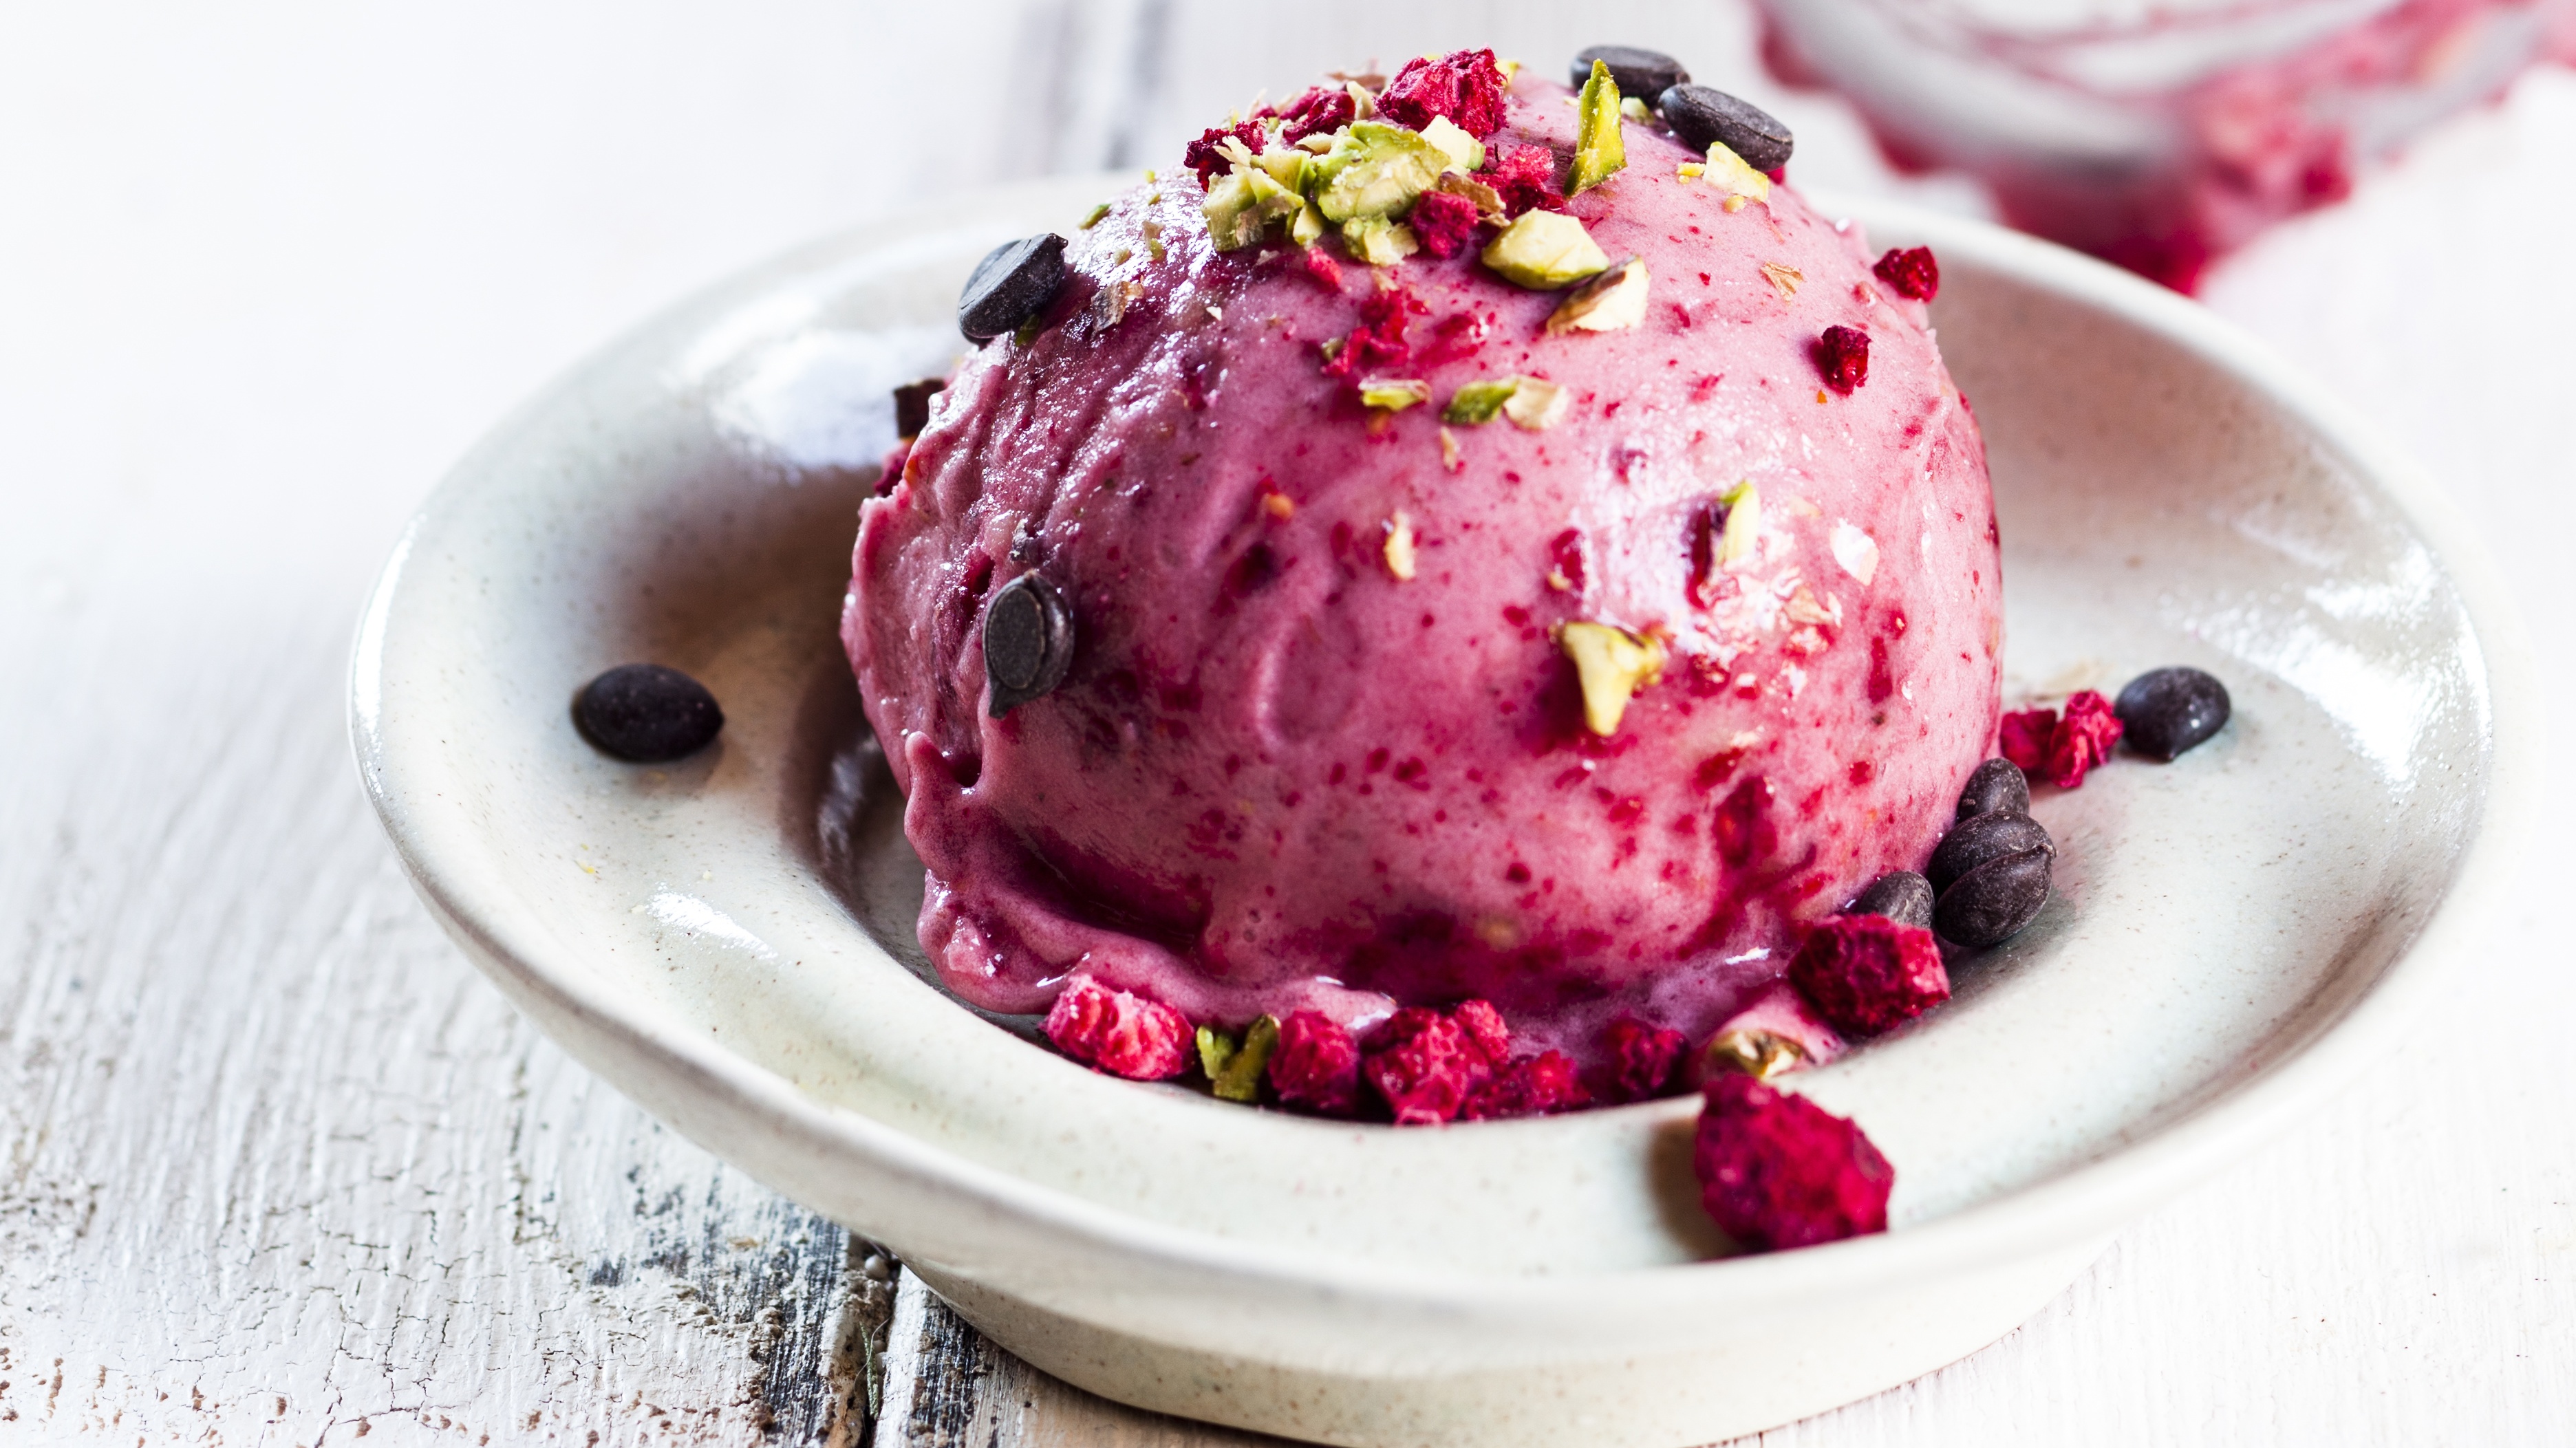 https://www.womansworld.com/wp-content/uploads/2021/09/berry-ice-cream-Cropped.jpeg